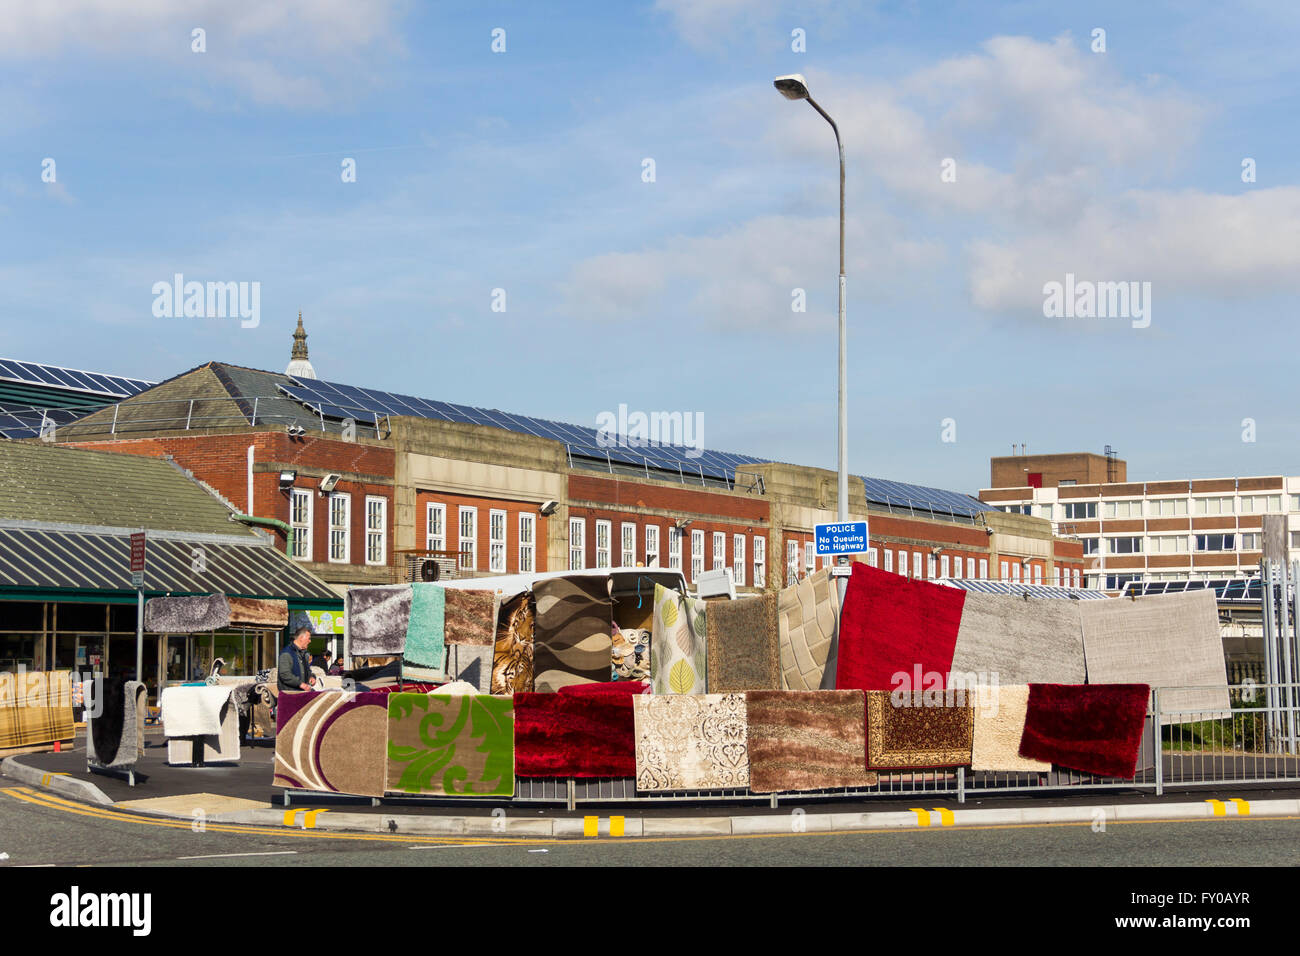 Outdoor stall selling rugs and carpets on Bolton market. The indoor market is in the background building. Stock Photo